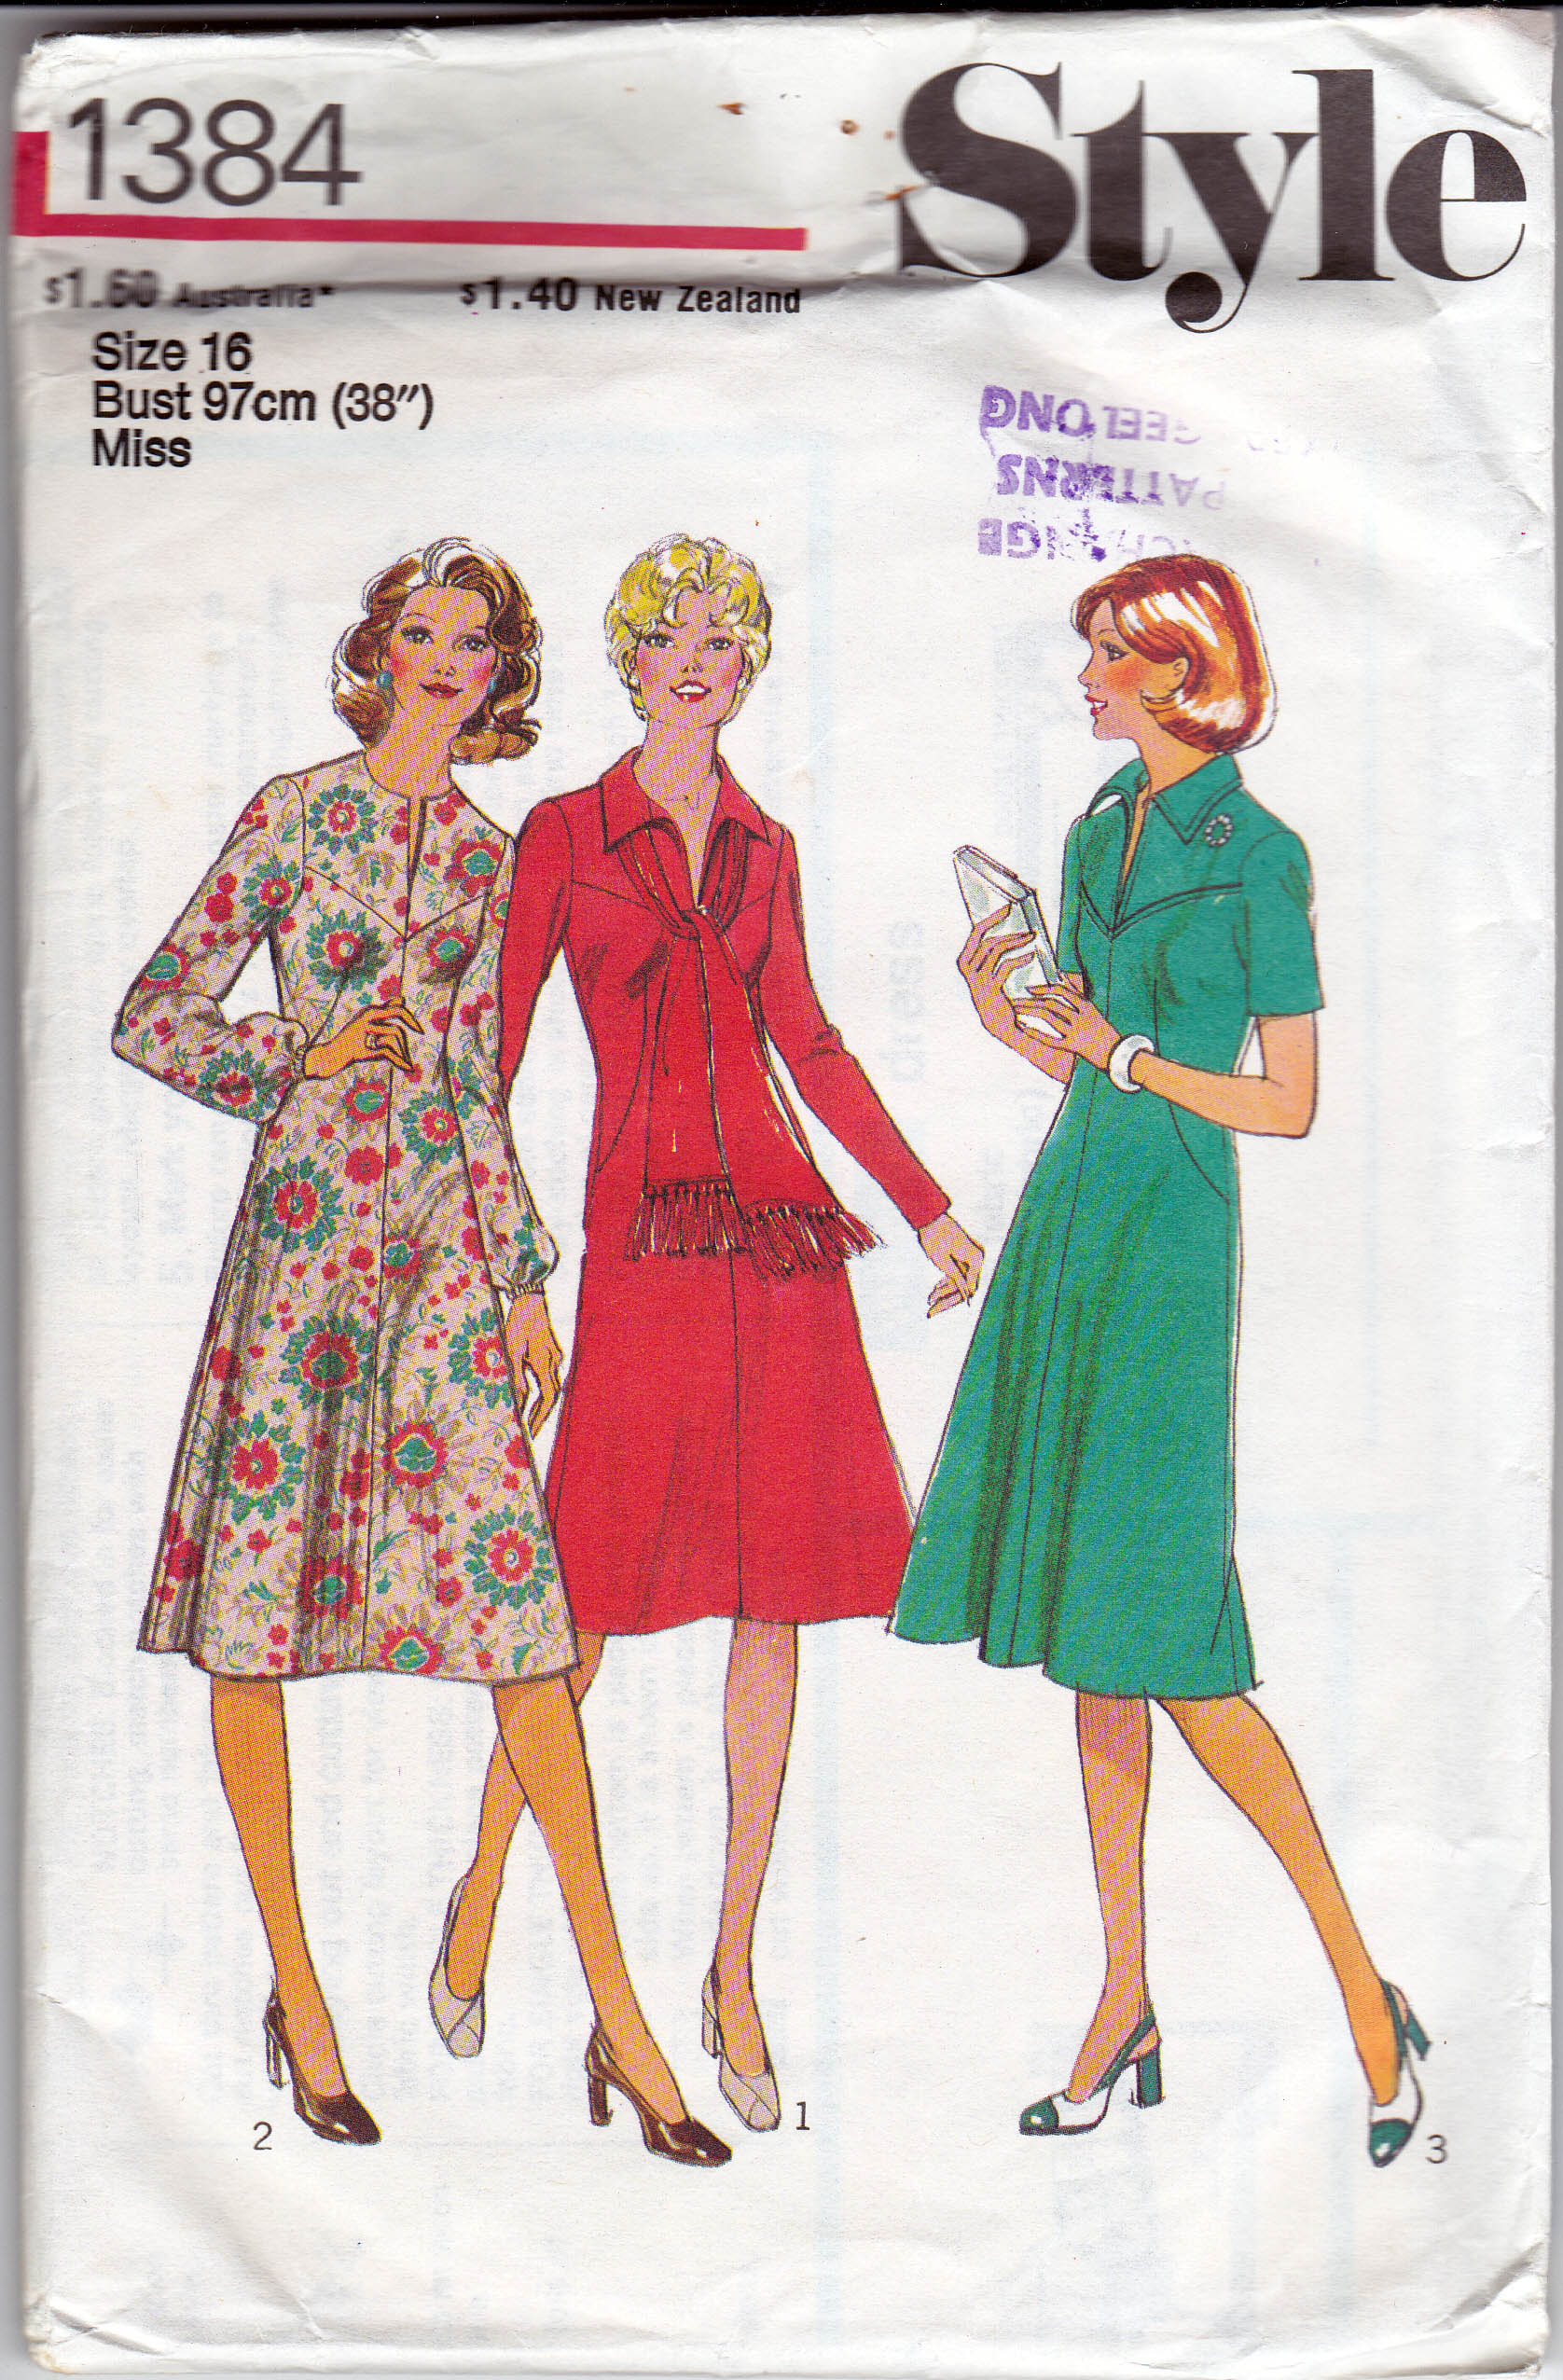 sewing pattern dating .35 cents per second